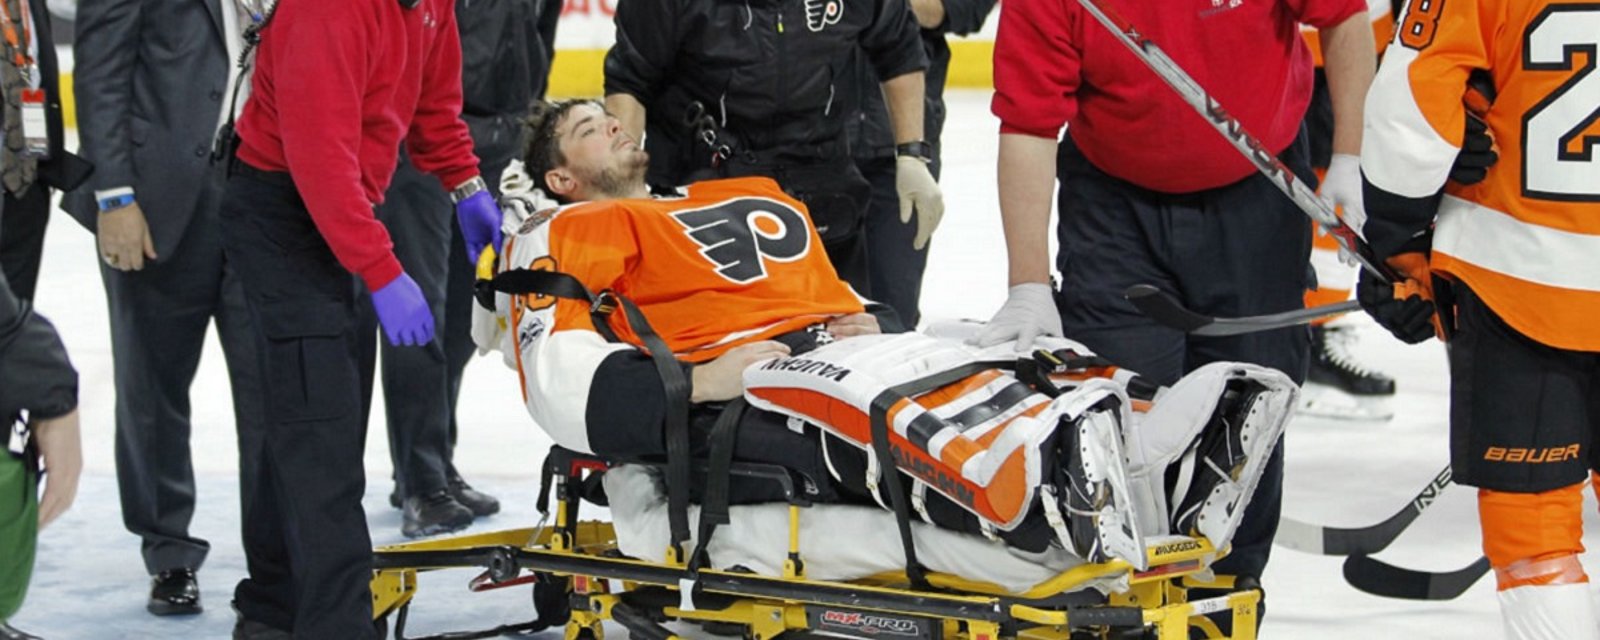 For the first time Neuvirth comments on the night he left the ice on a stretcher.